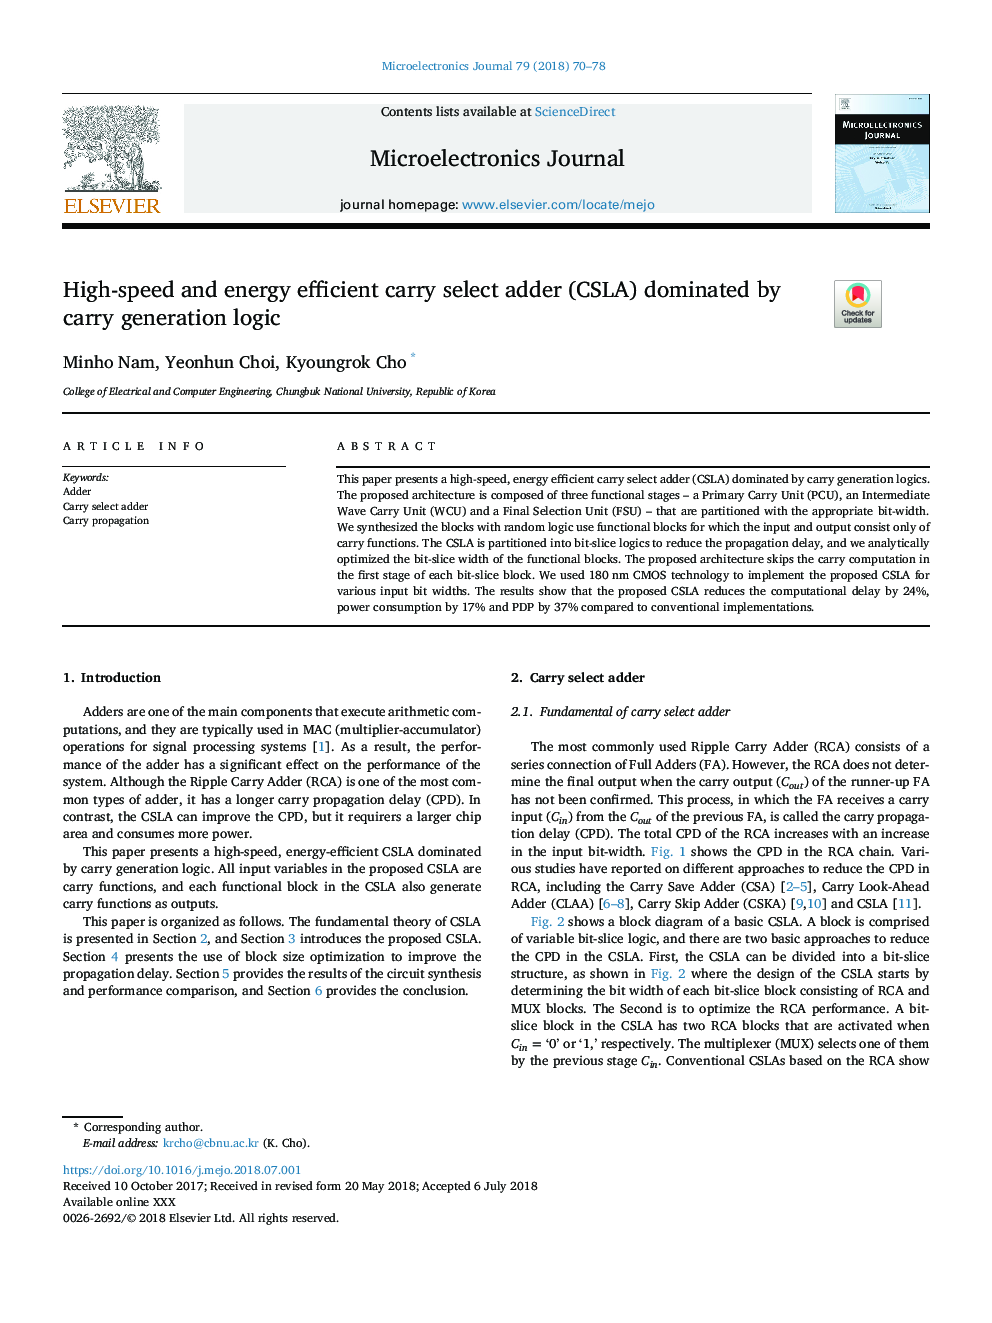 High-speed and energy efficient carry select adder (CSLA) dominated by carry generation logic